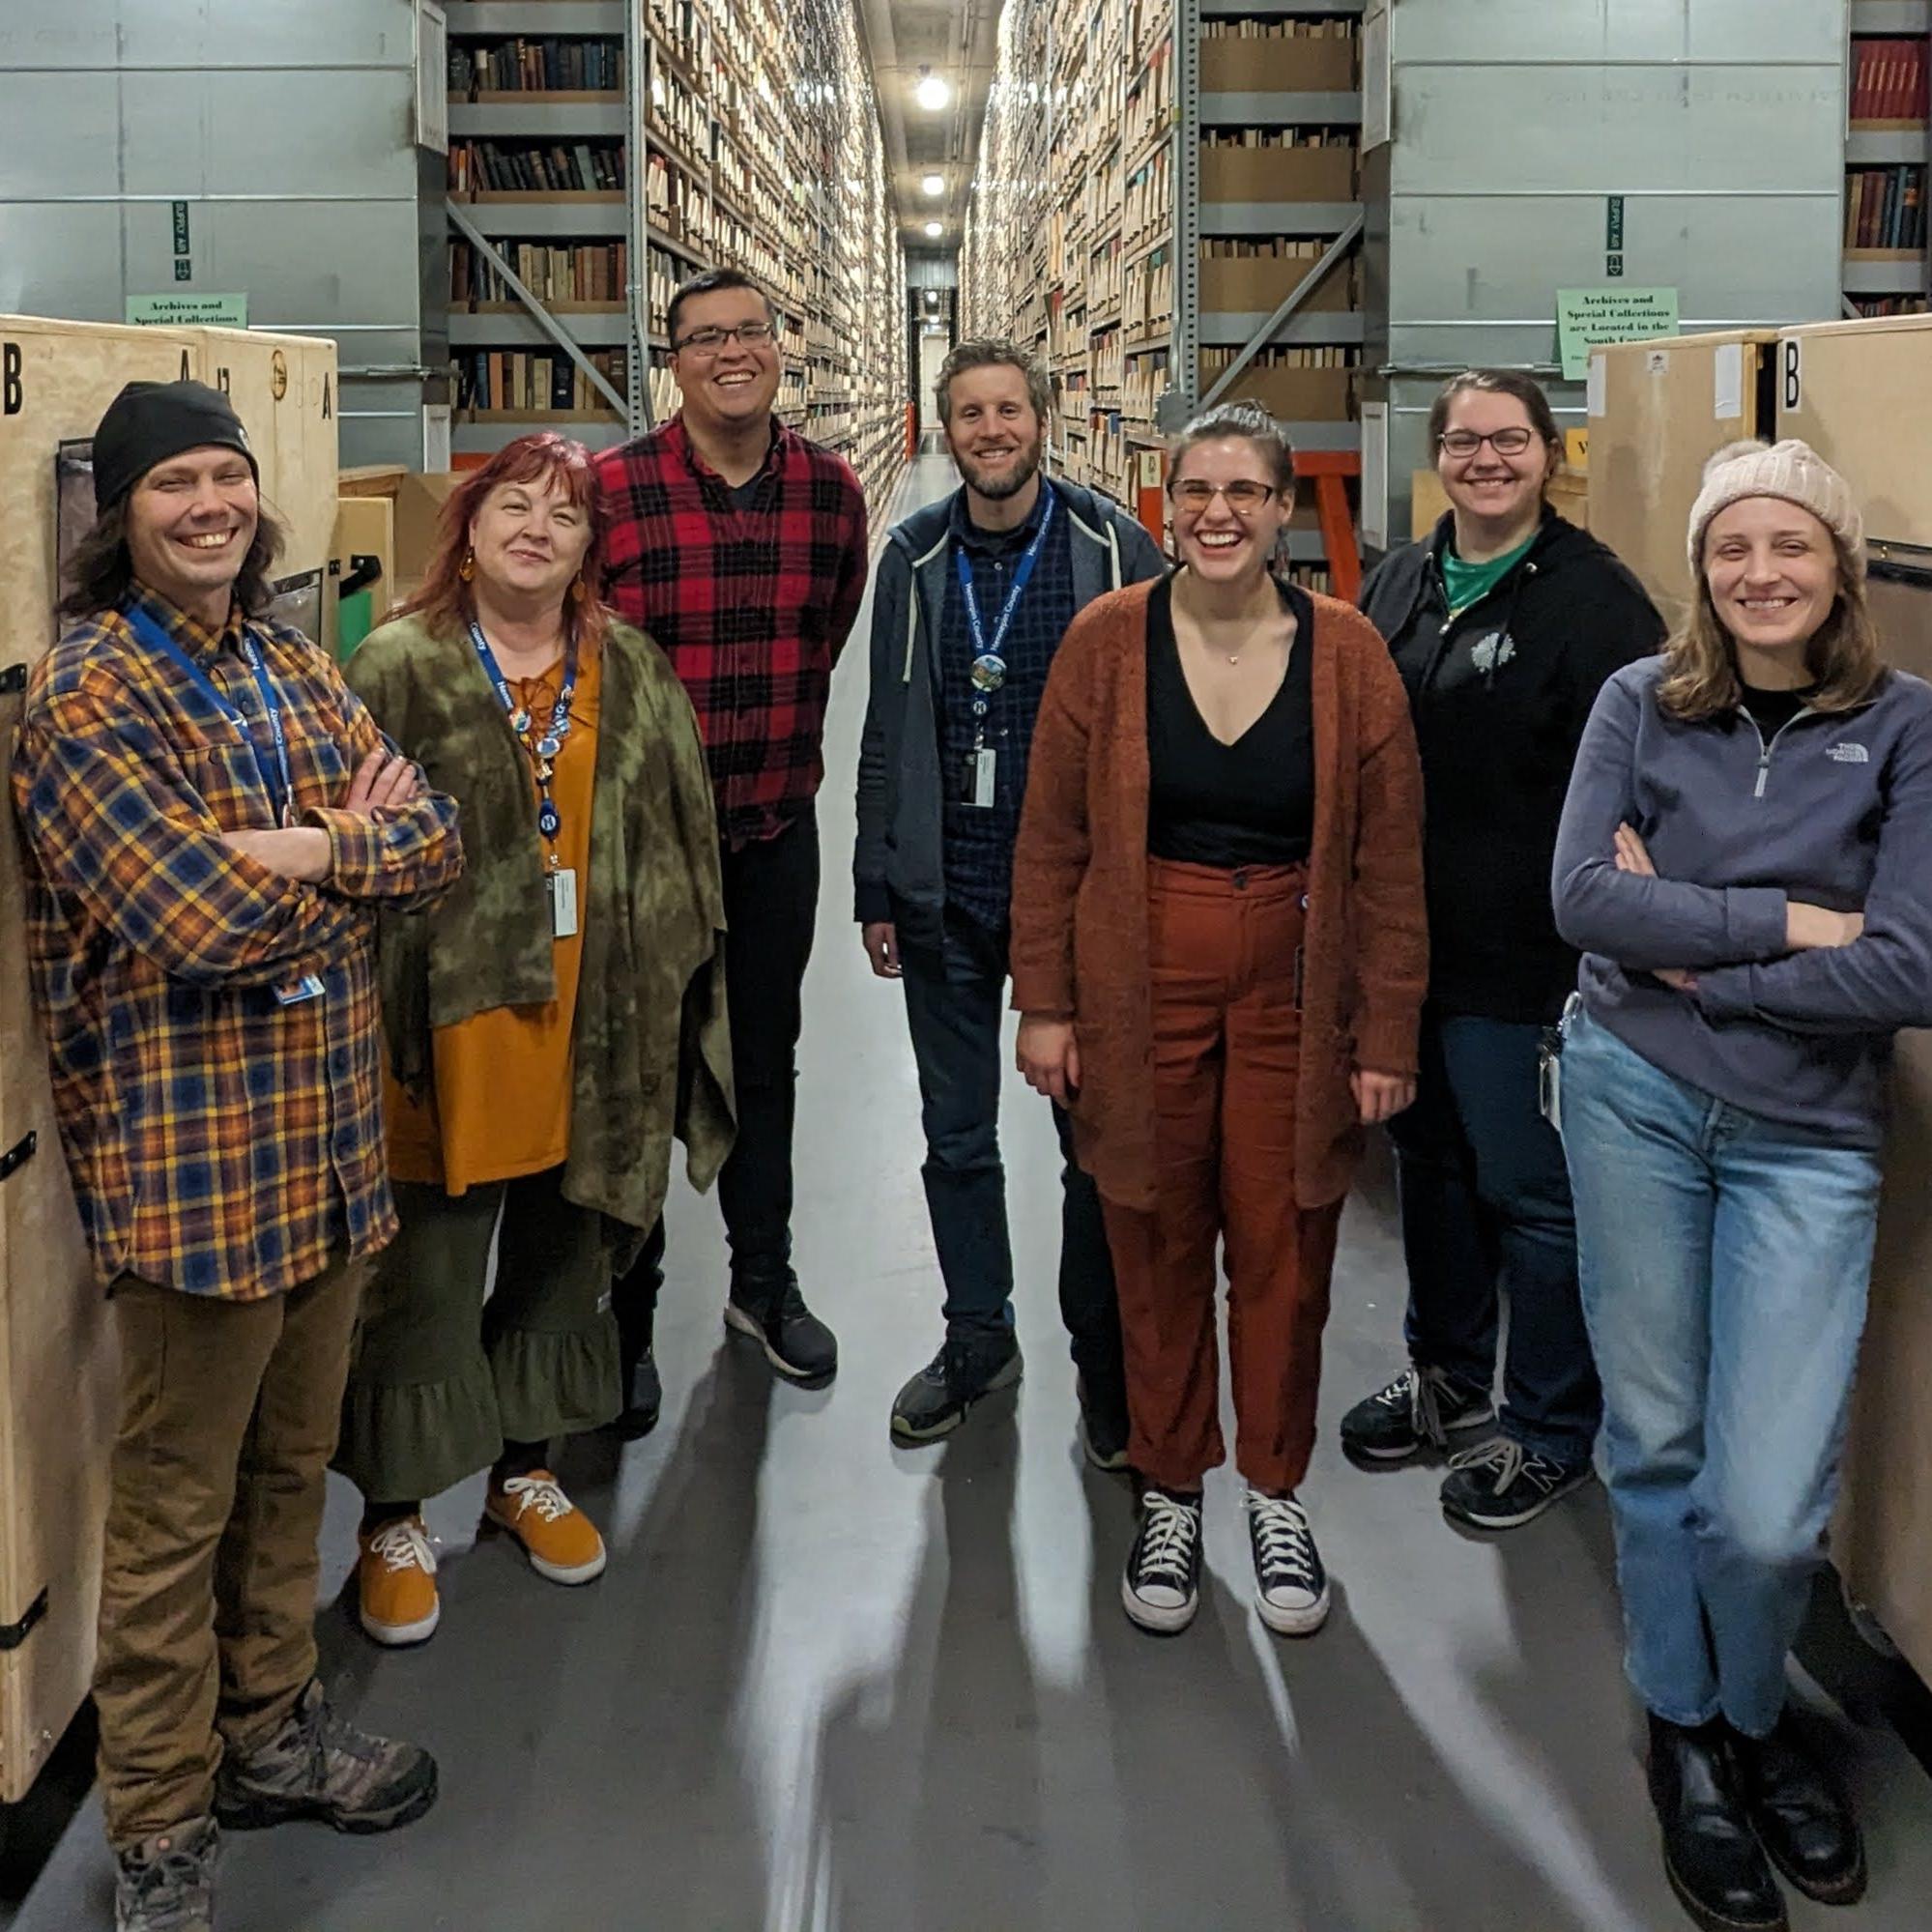 Eight library staff stand pose in front of the stacks in MLAC.